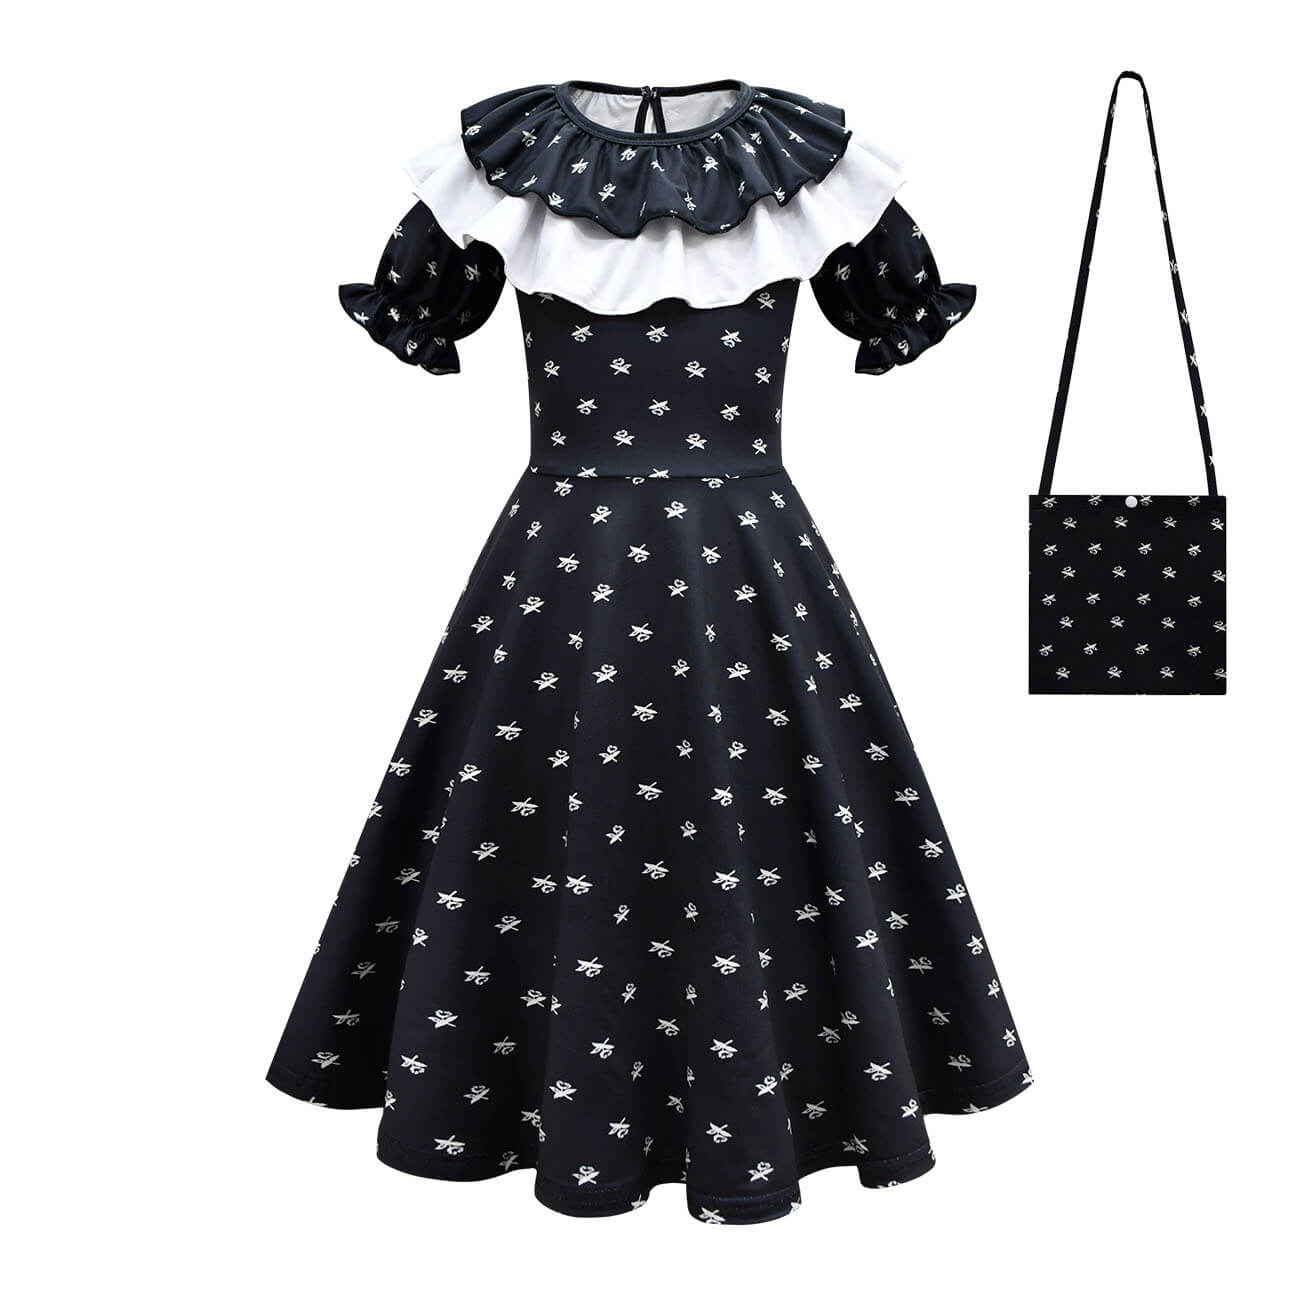 Wednesday Addams Dress Girls Wednesday Costume with Wig Gloves Bag for Cosplay